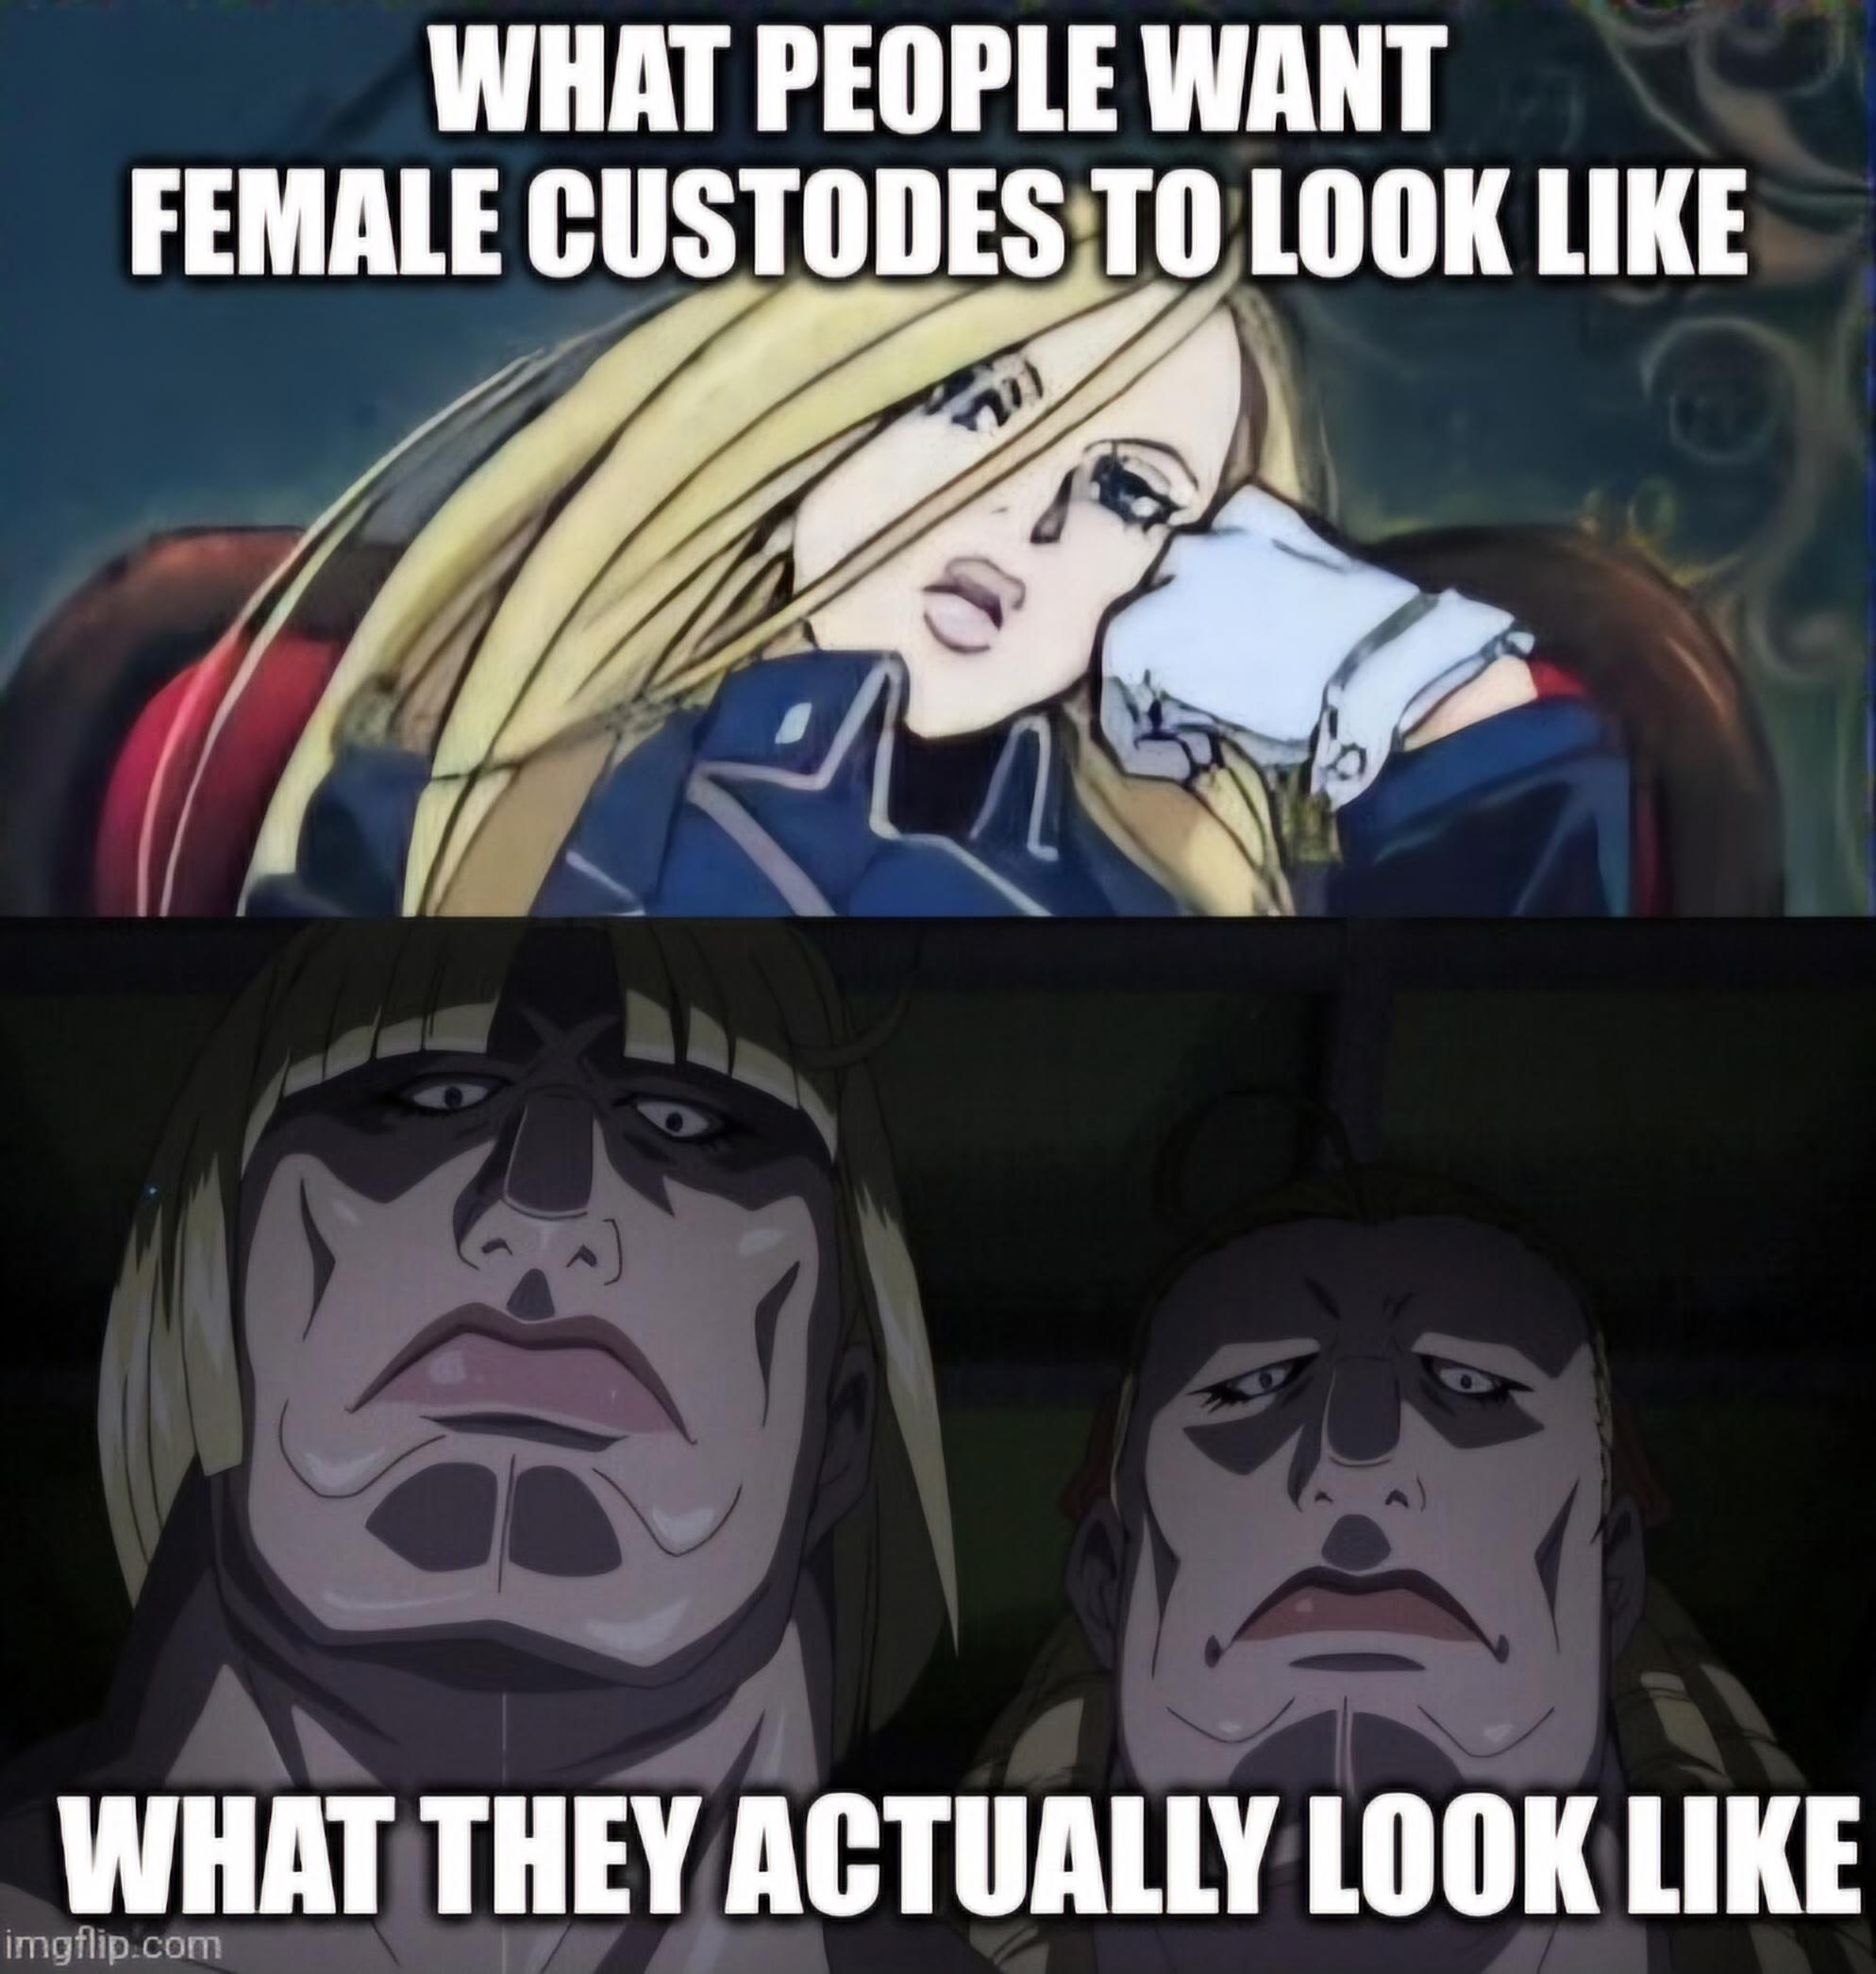 r/Grimdank - There is a reason why female custodes went unnoticed for so long.